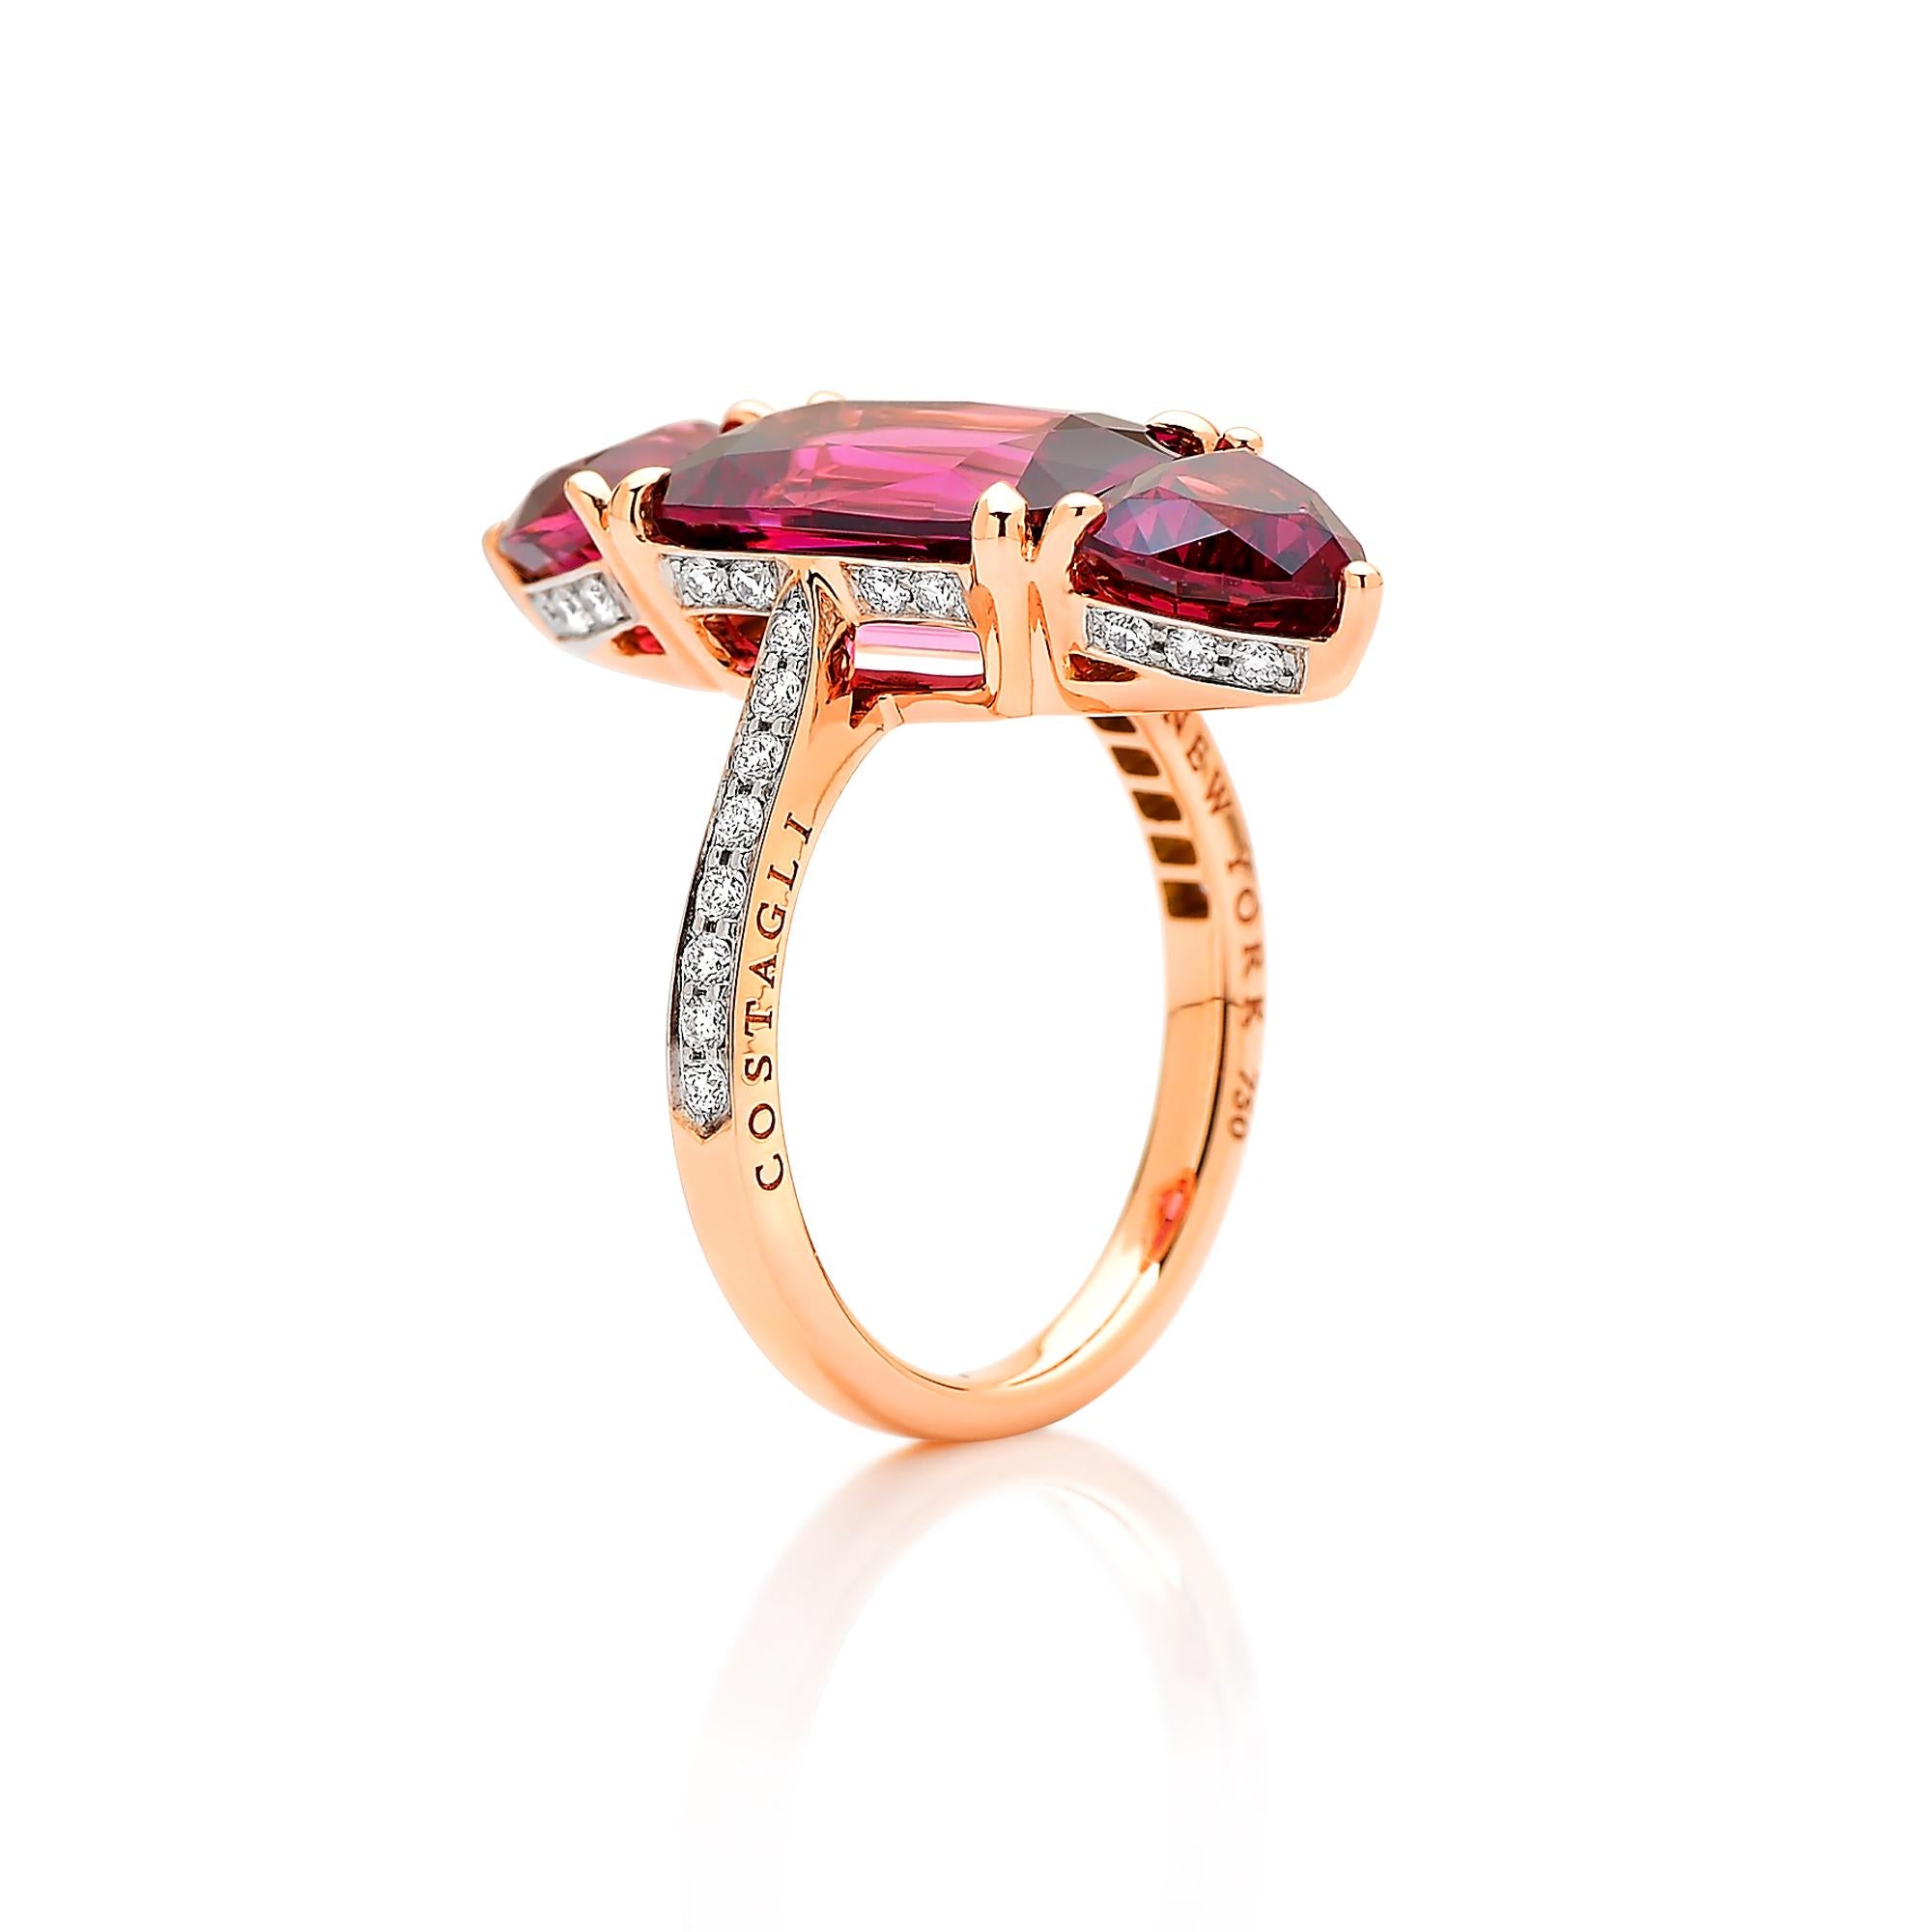 One of a kind emerald cut rhodolite garnet ring flanked by trillion shape rhodolite garnets set in 18kt rose gold with pave-set round, brilliant diamond detailing.

Clean lines, warm colored natural gemstones, and ideal cutting make this rhodolite